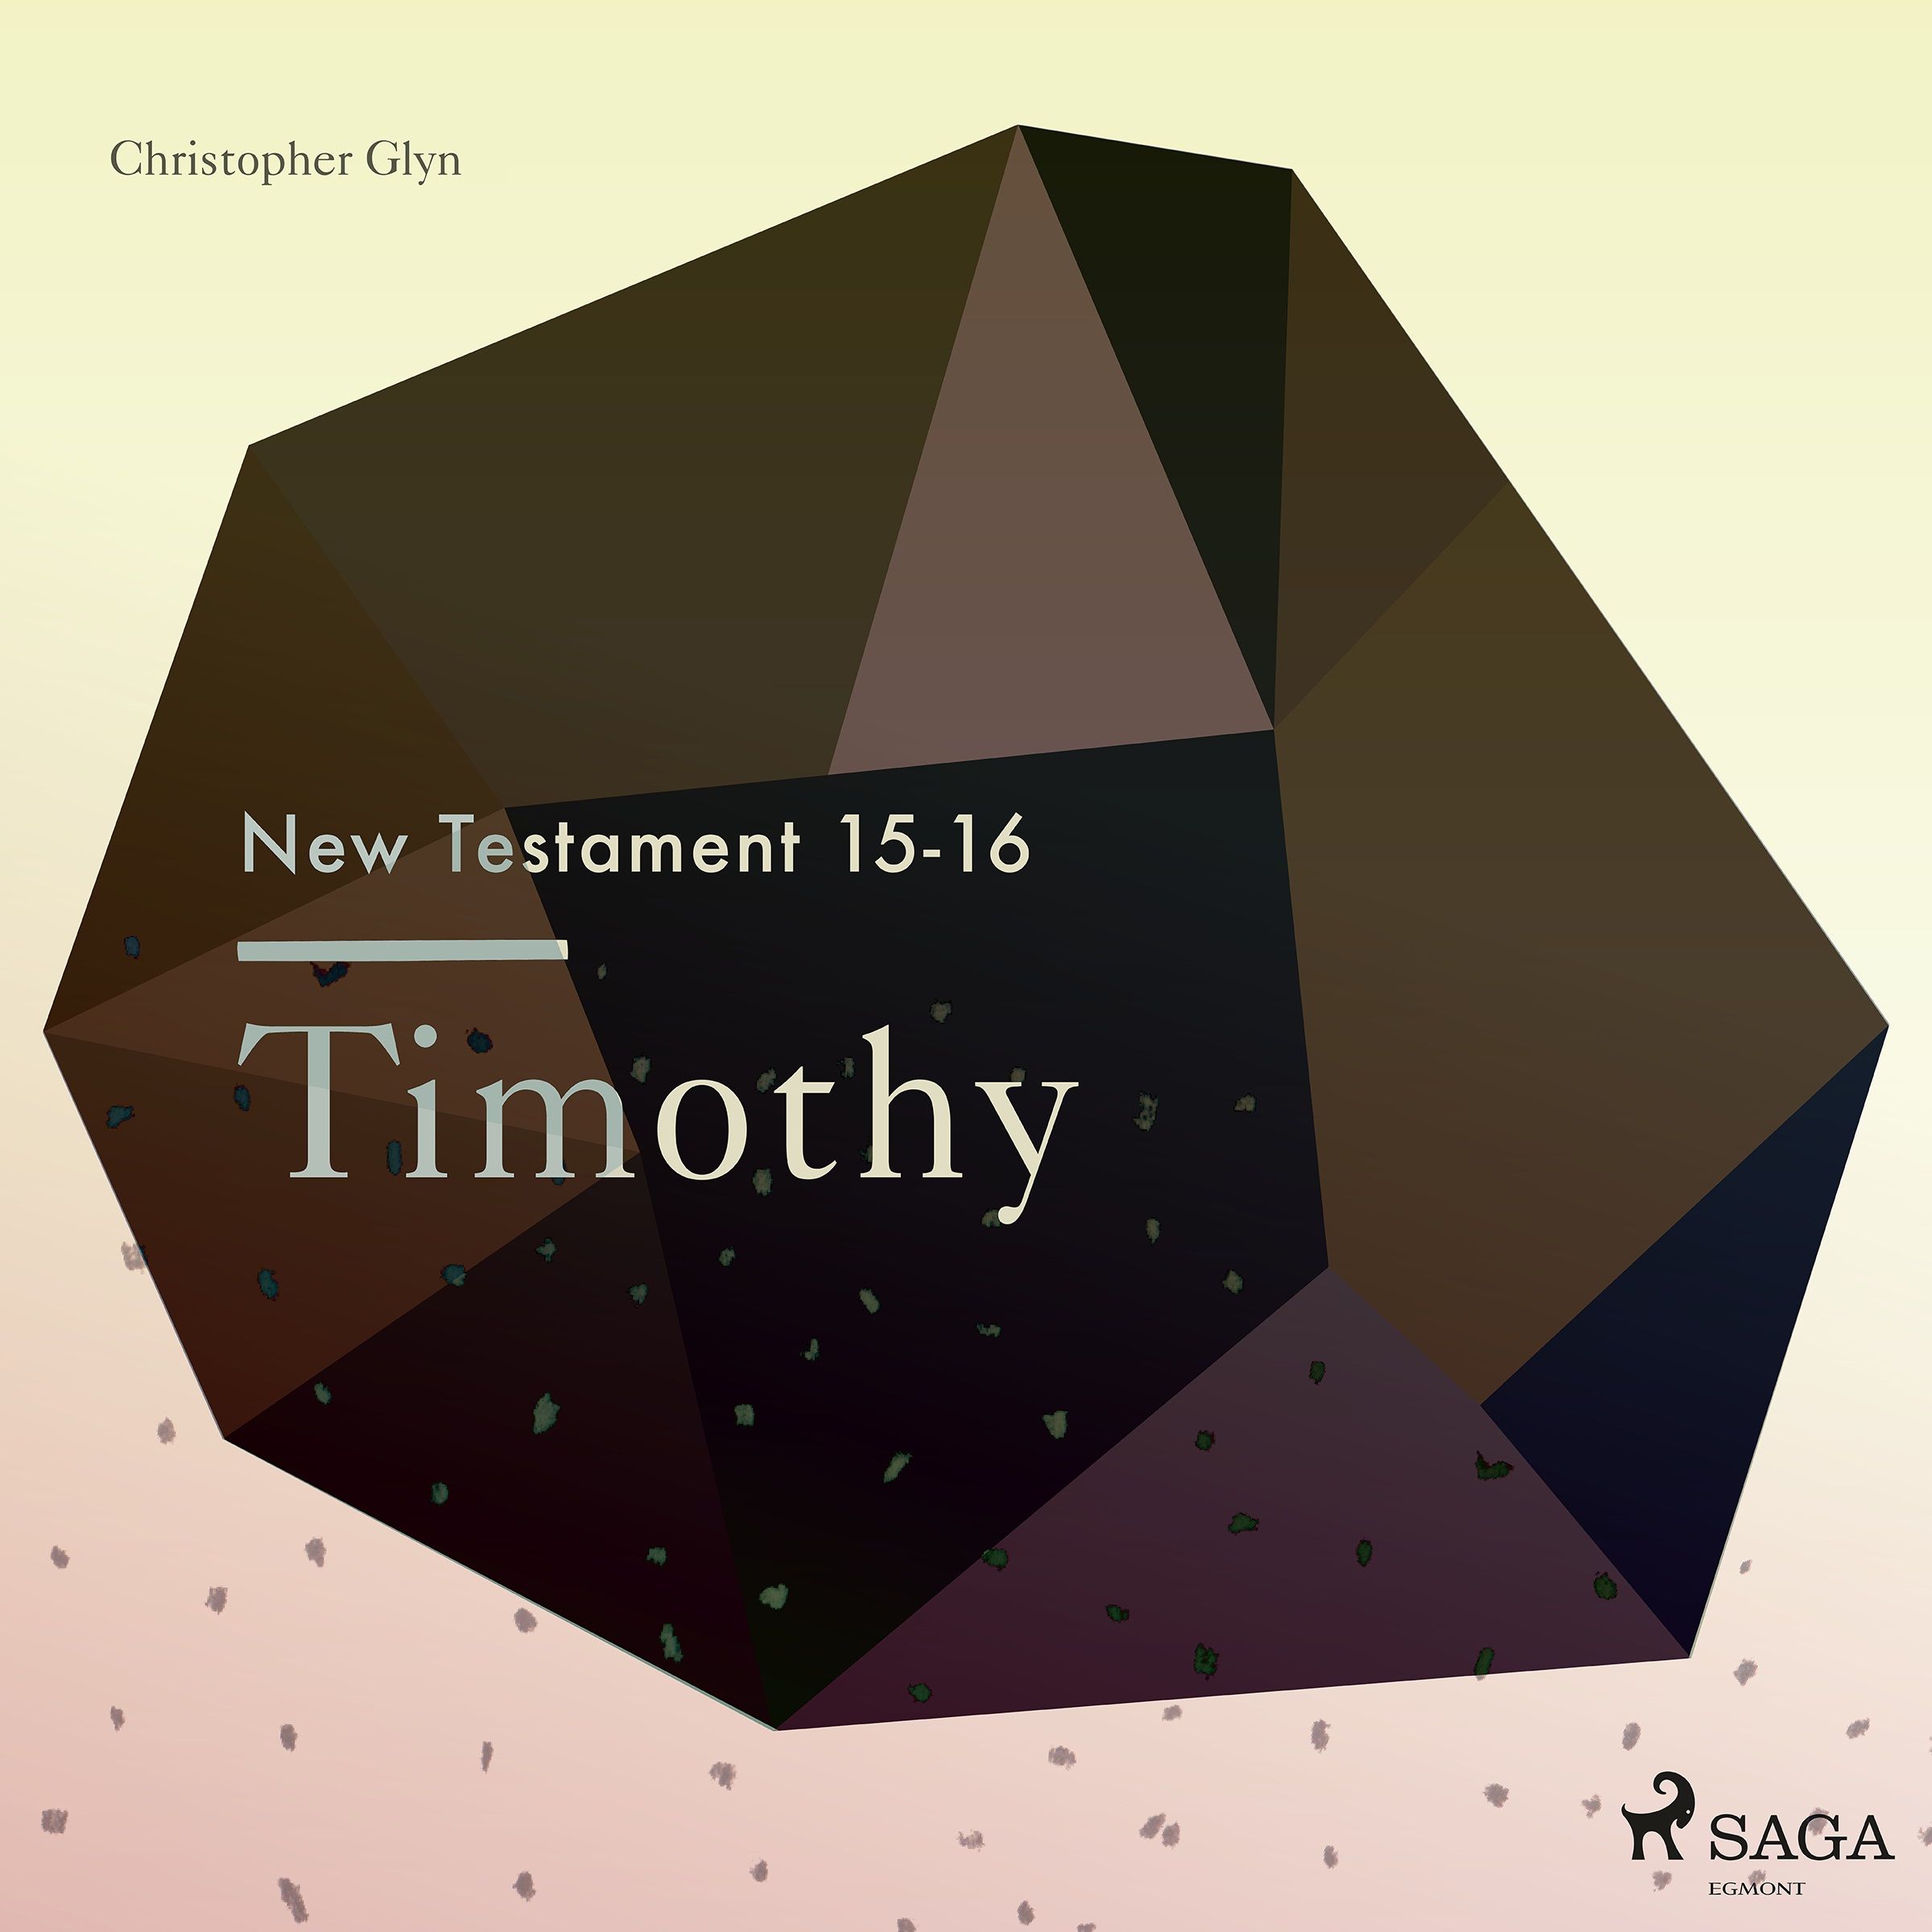 The New Testament 15-16 - Timothy, audiobook by Christopher Glyn